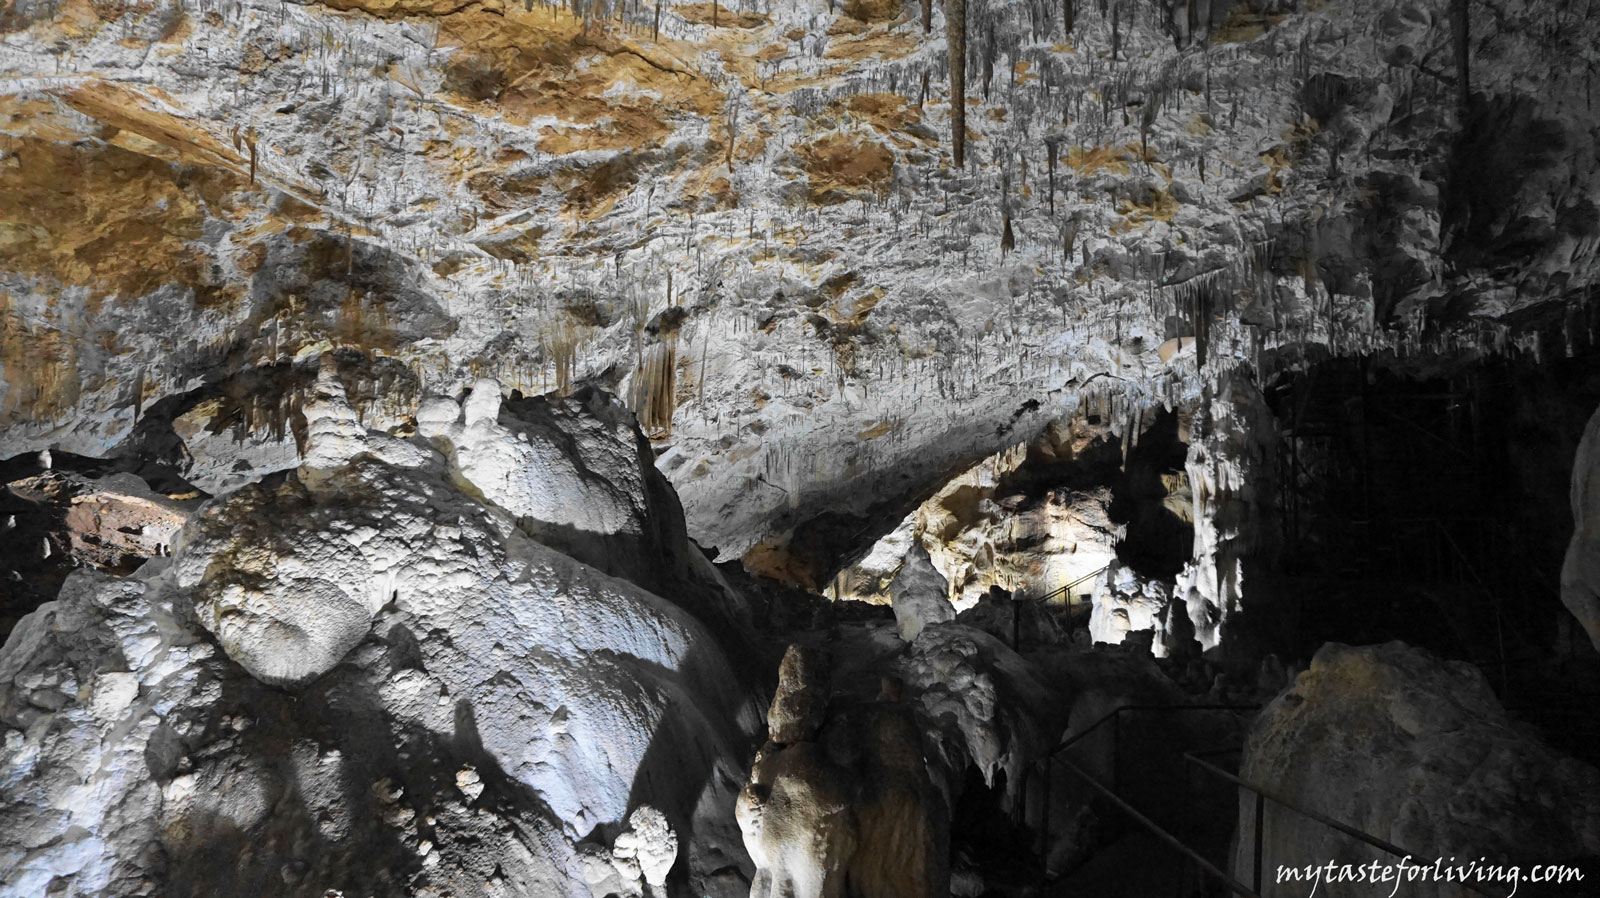 The "Dobrostanski biser" cave is a cave in the Rhodope Mountains, located in the "Red Wall" reserve in the municipality of Asenovgrad. It is also known as "Ahmetyova Dupka".